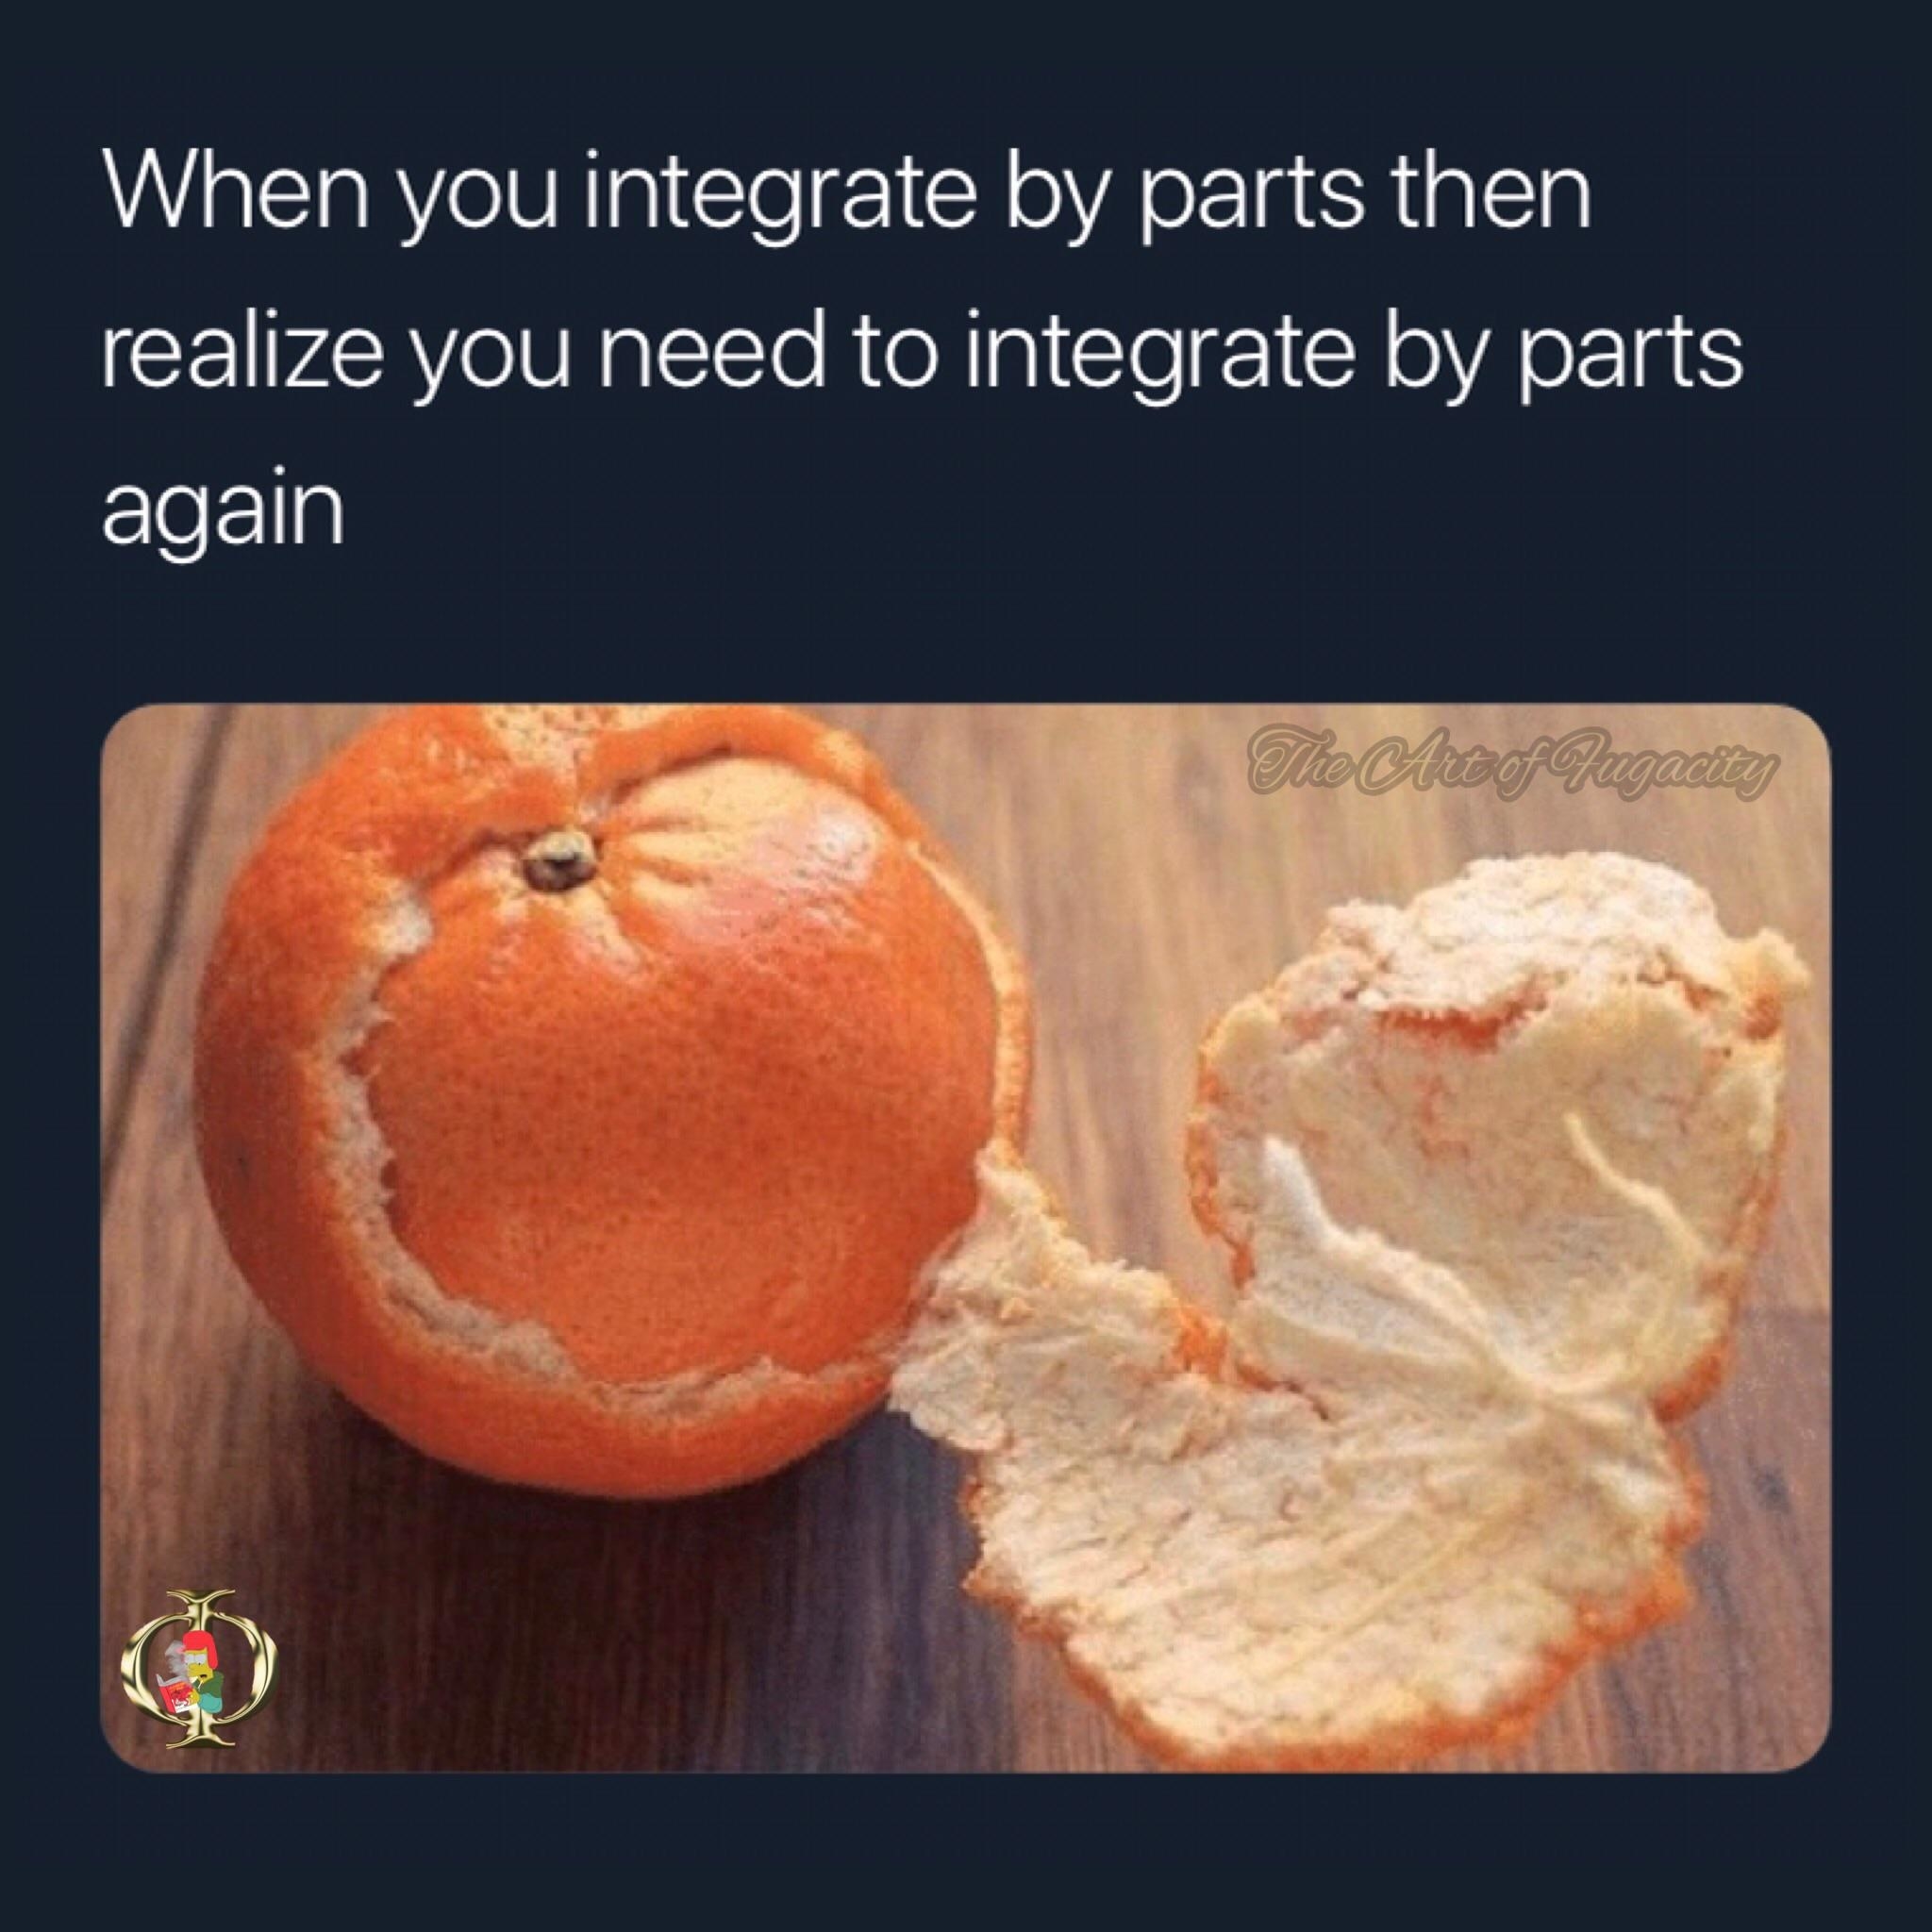 &quot;when you integrate by parts and realize you need to do it again&quot; with a pic of an orange peeled to reveal another orange